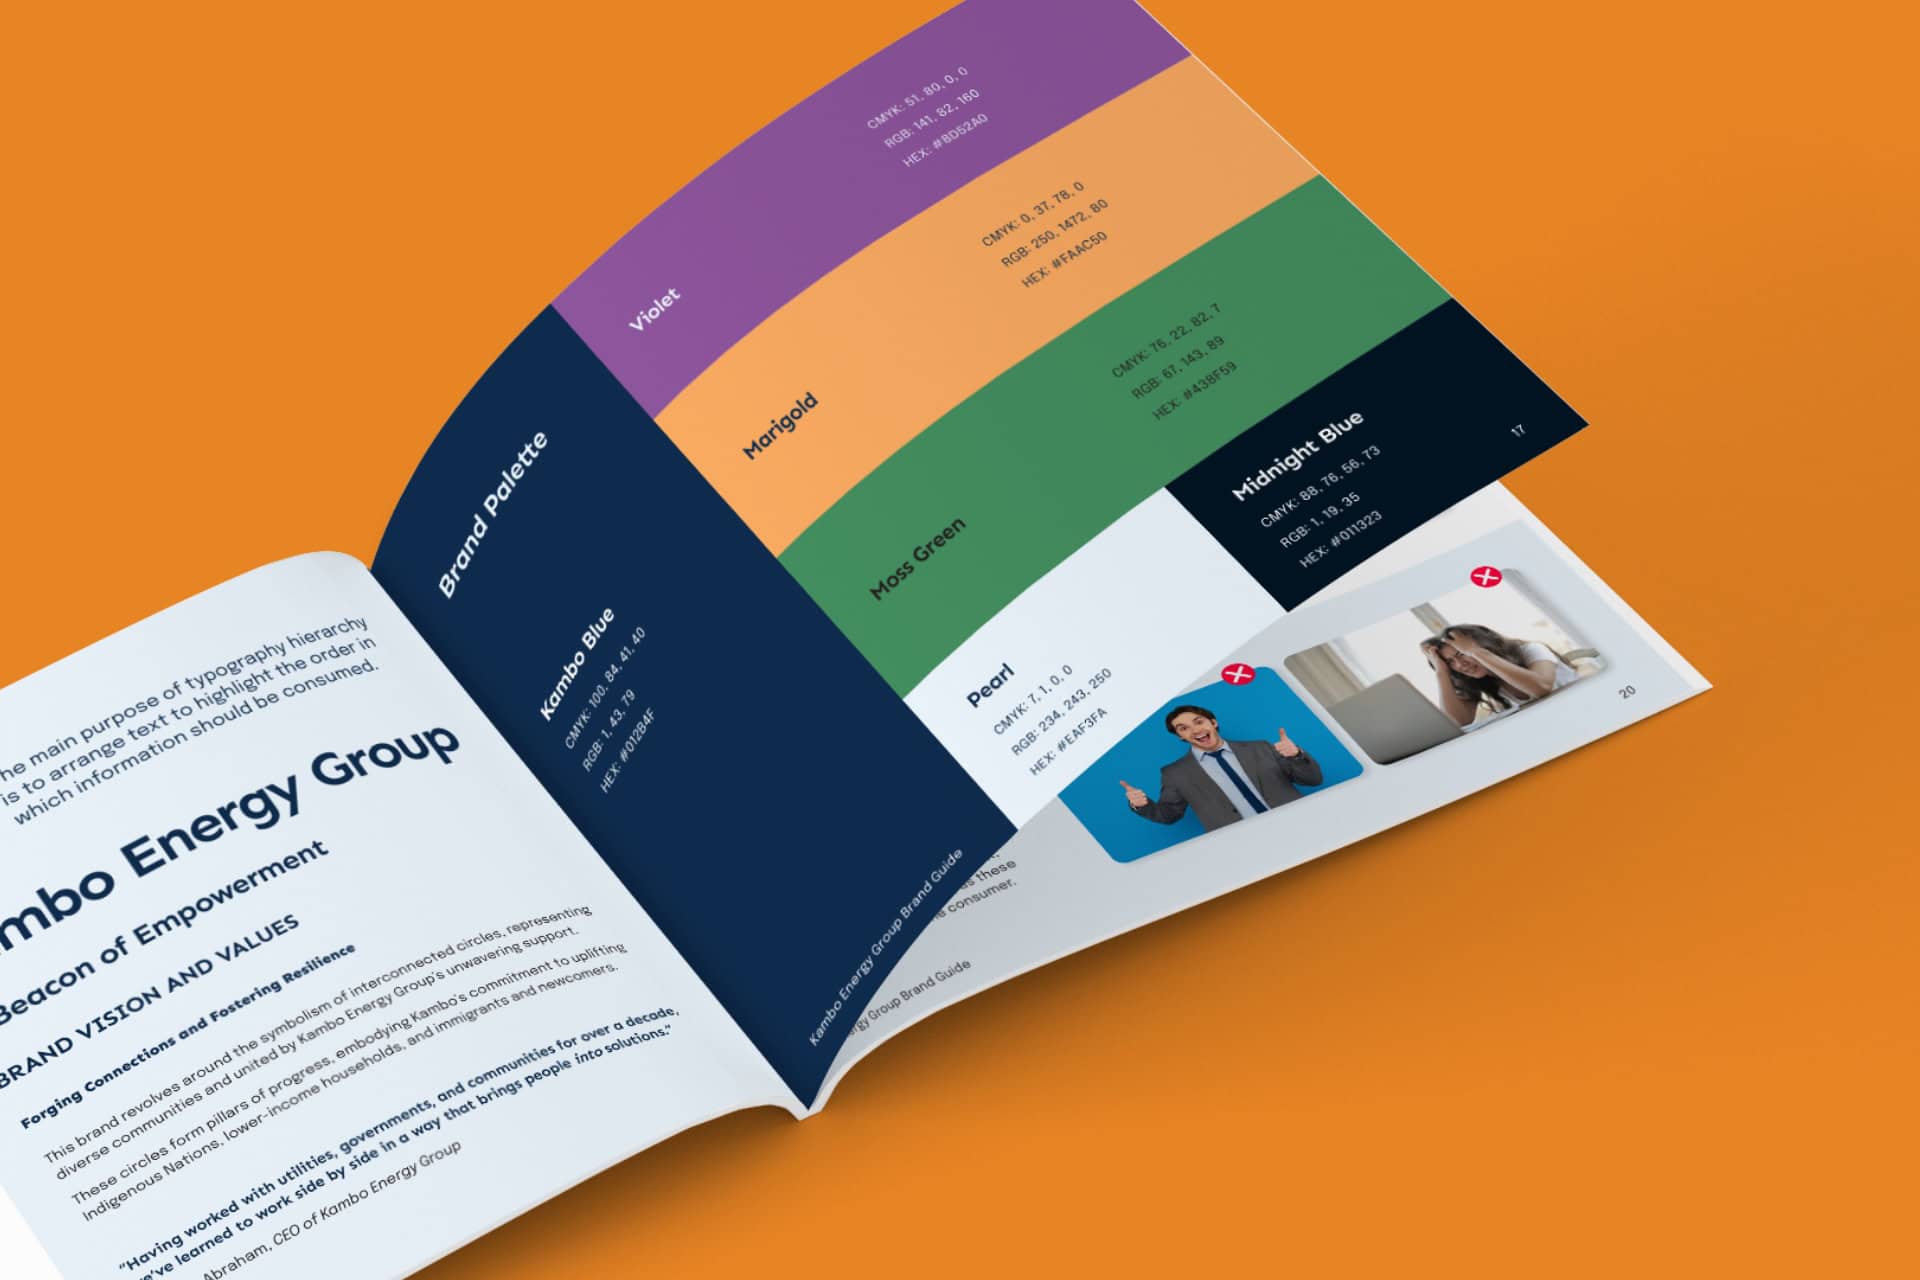 The interior of the Kambo Energy Group brand guide is shown, with colours indicating the different aspects of this brand's identity.